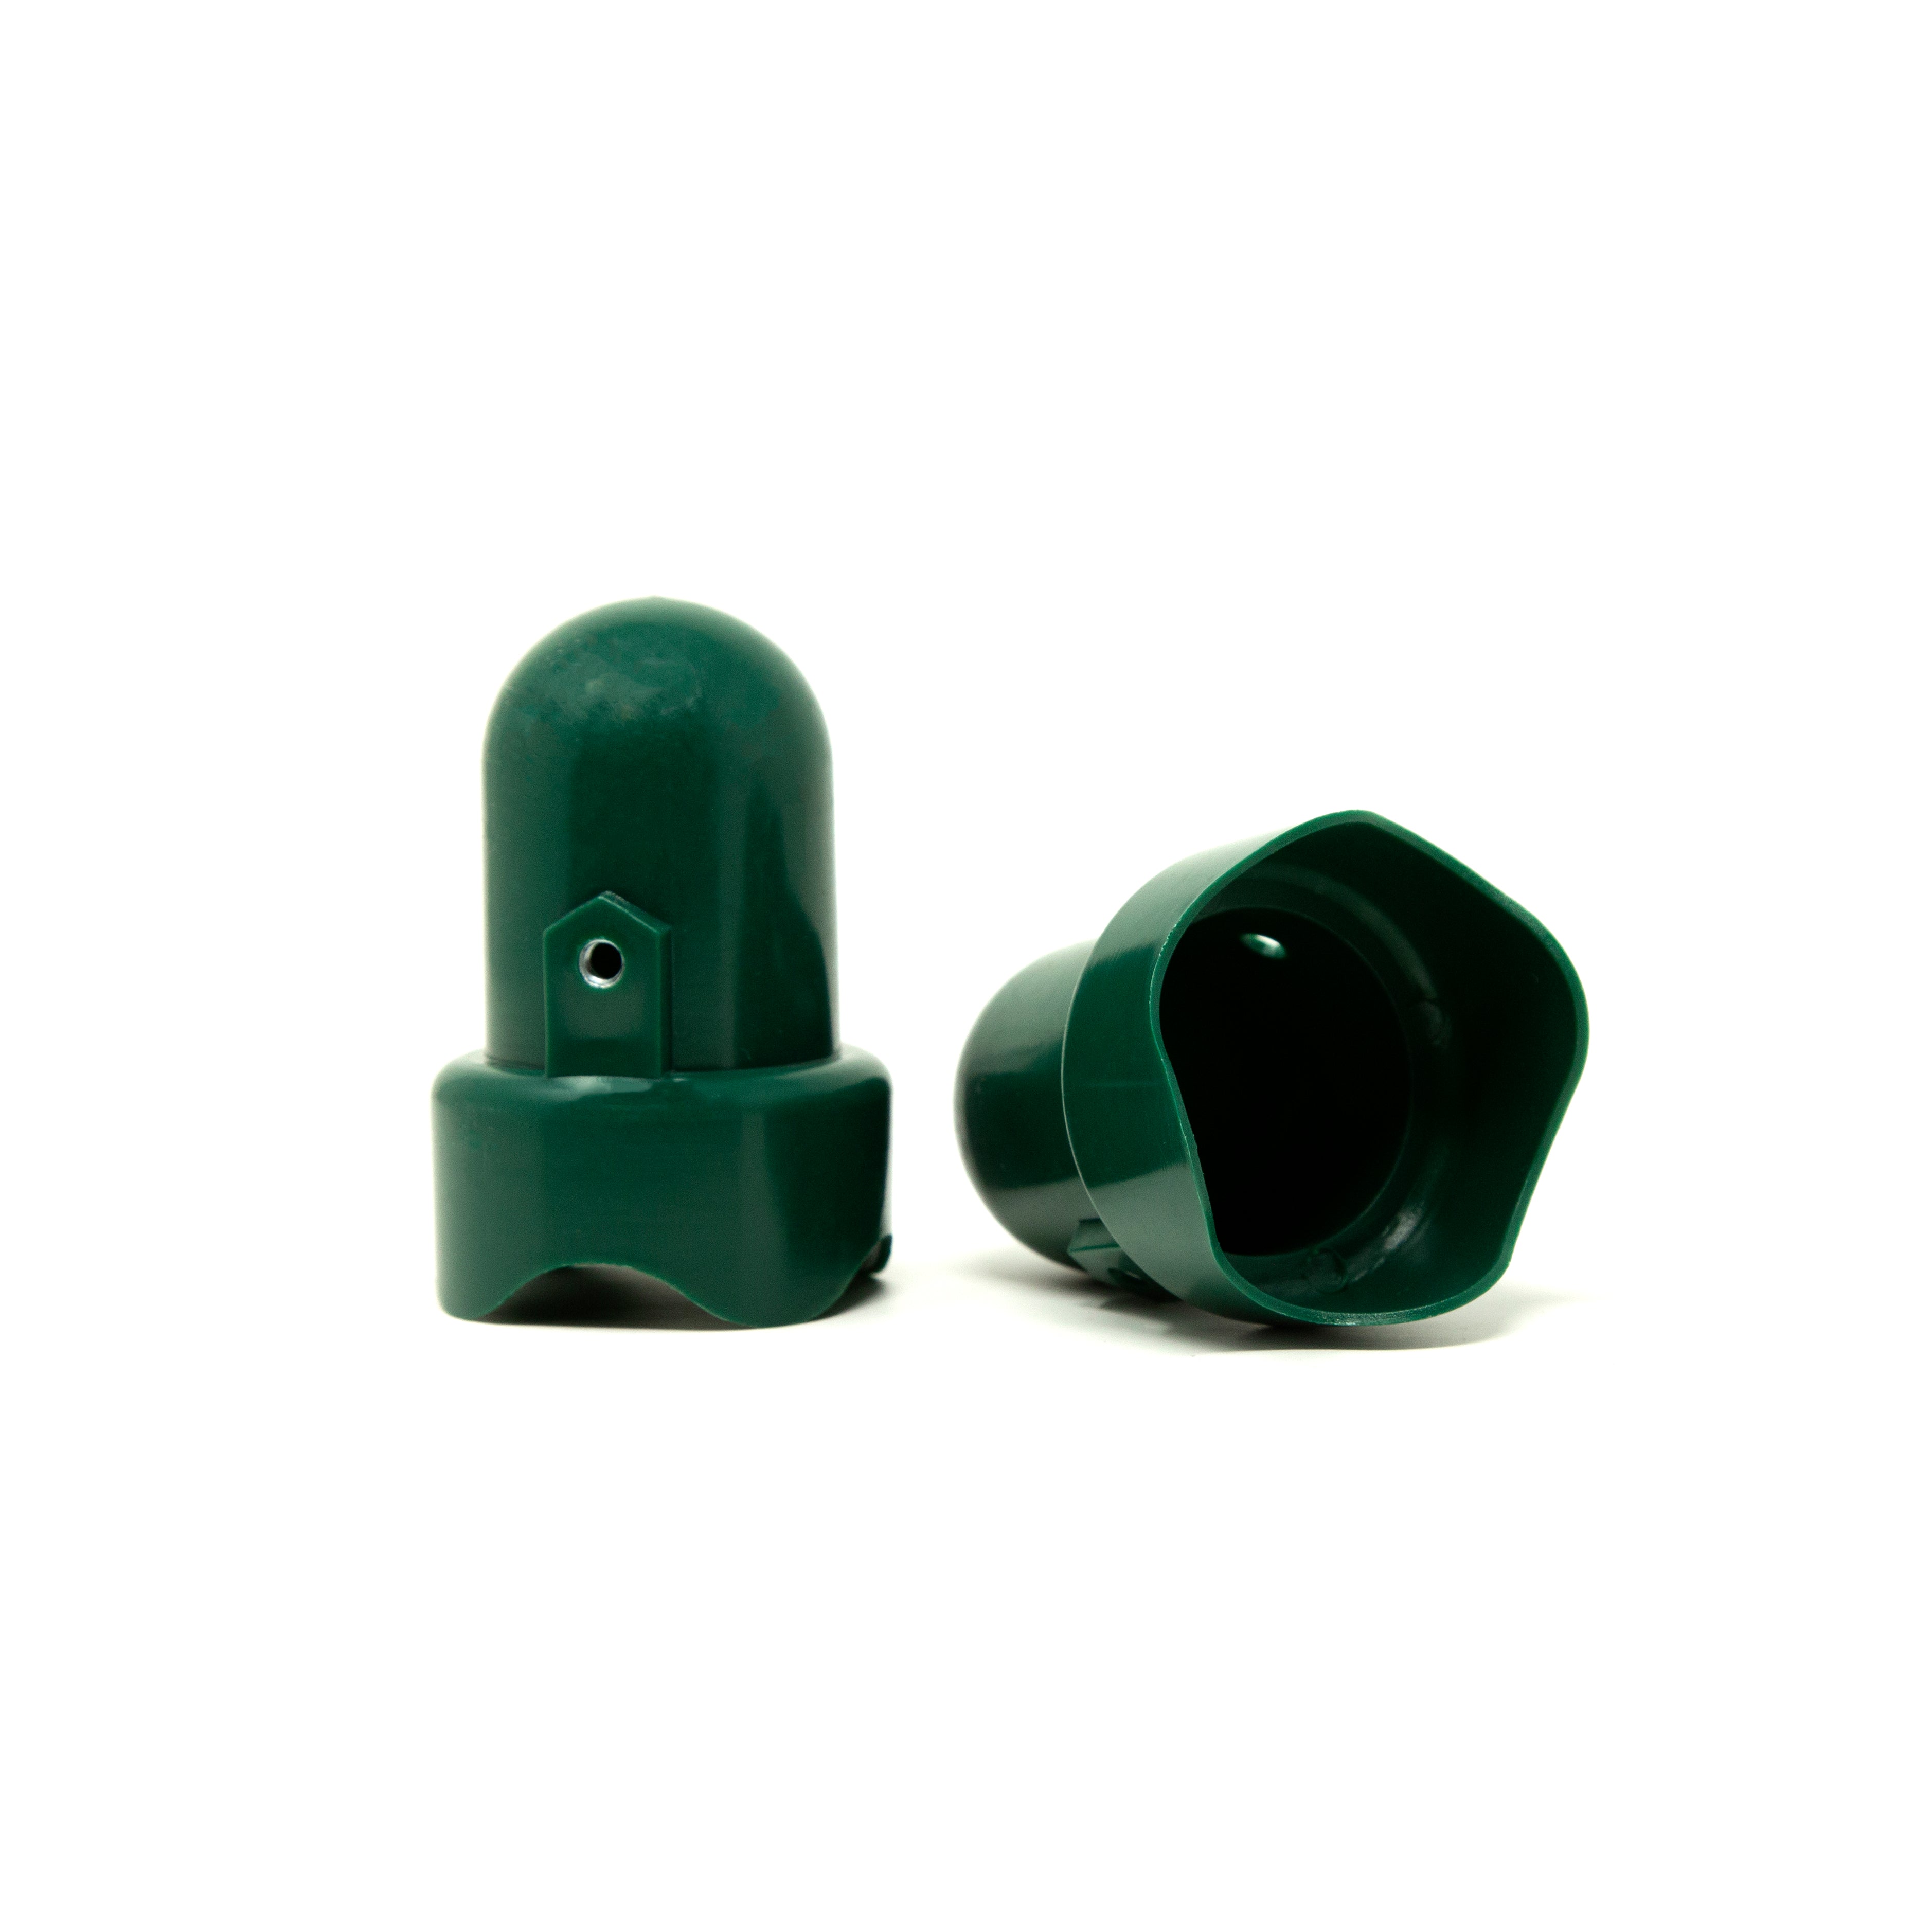 Two green pole caps, one lying on its side. 